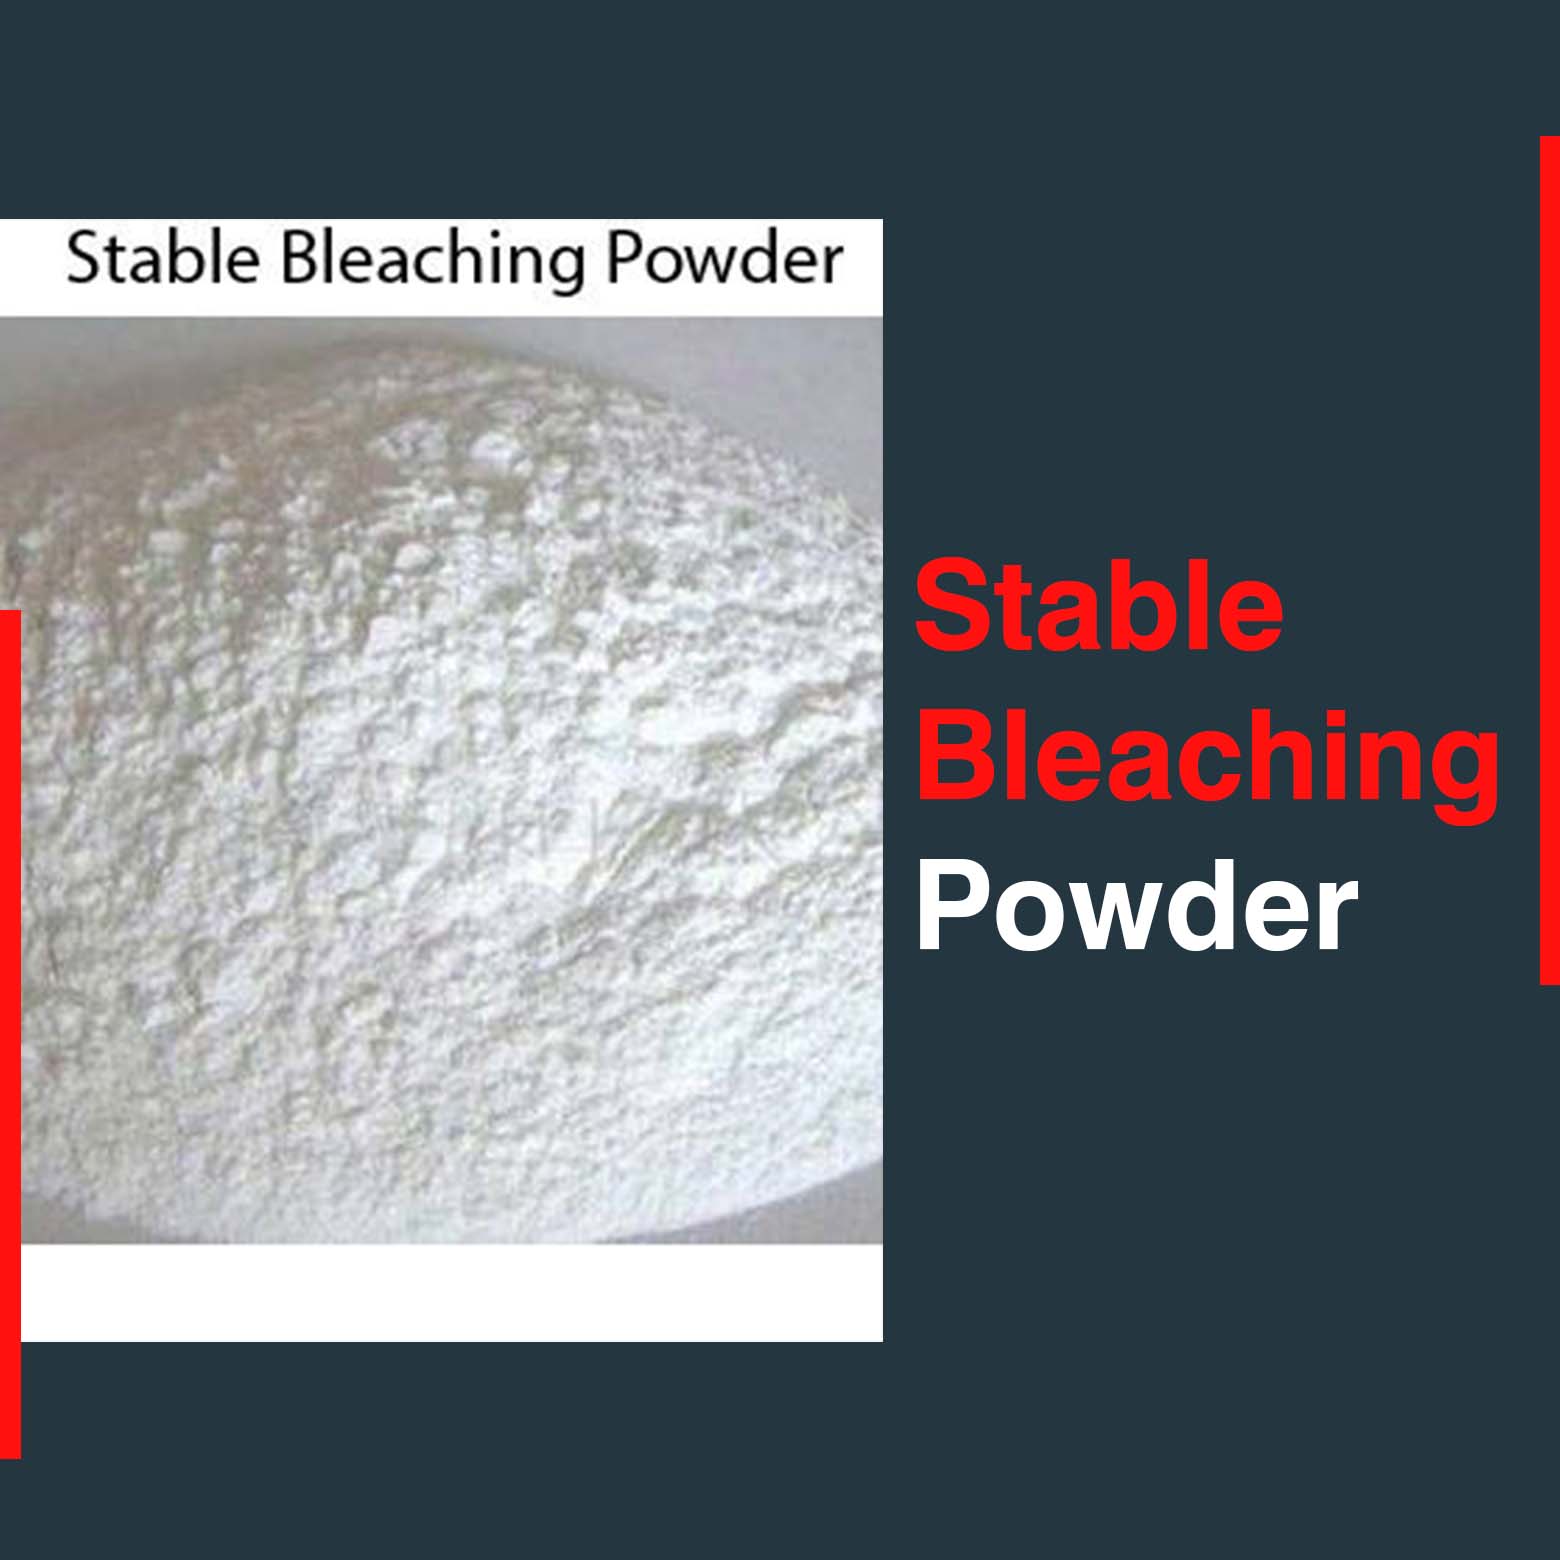 Stable Bleaching Powder In Sikasso